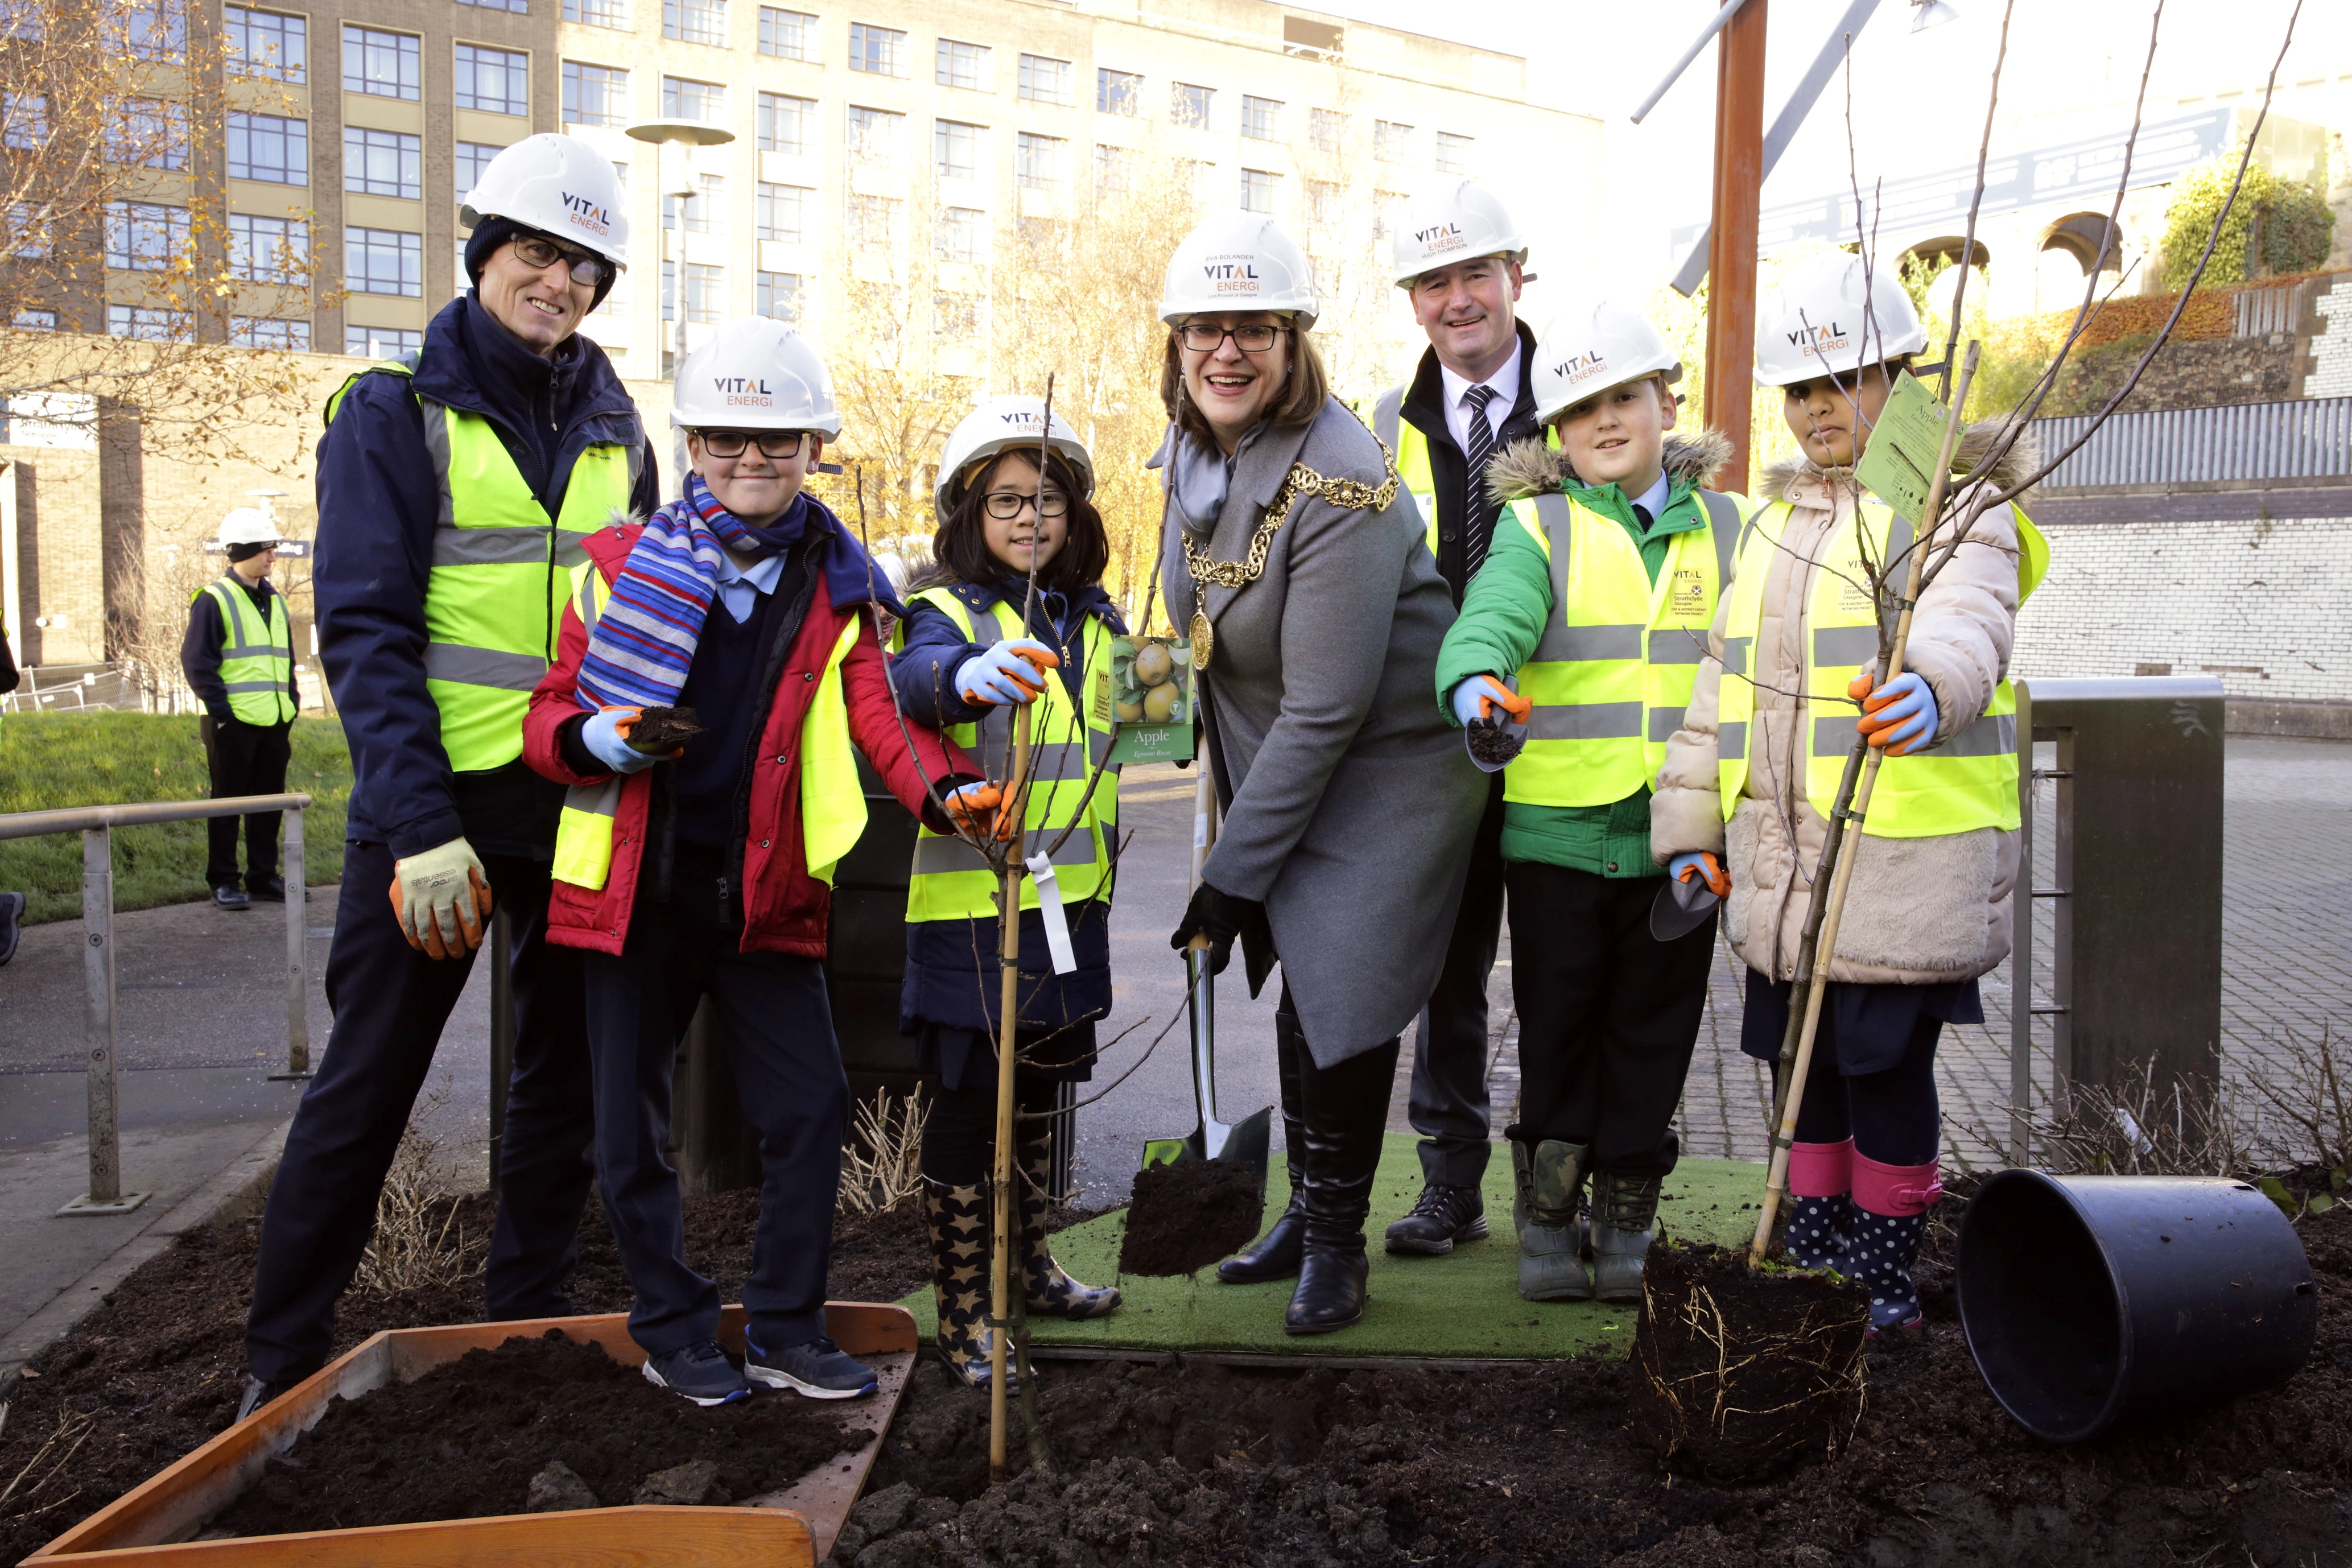 Roddy Yarr, Assistant Director of Estates Services at the University of Strathclyde (Left), Glasgow Lord Provost Eva Bolander (Centre) Hugh Thompson, Project Director for Vital Energi (Right) joined by pupils from St Mungo’s Primary